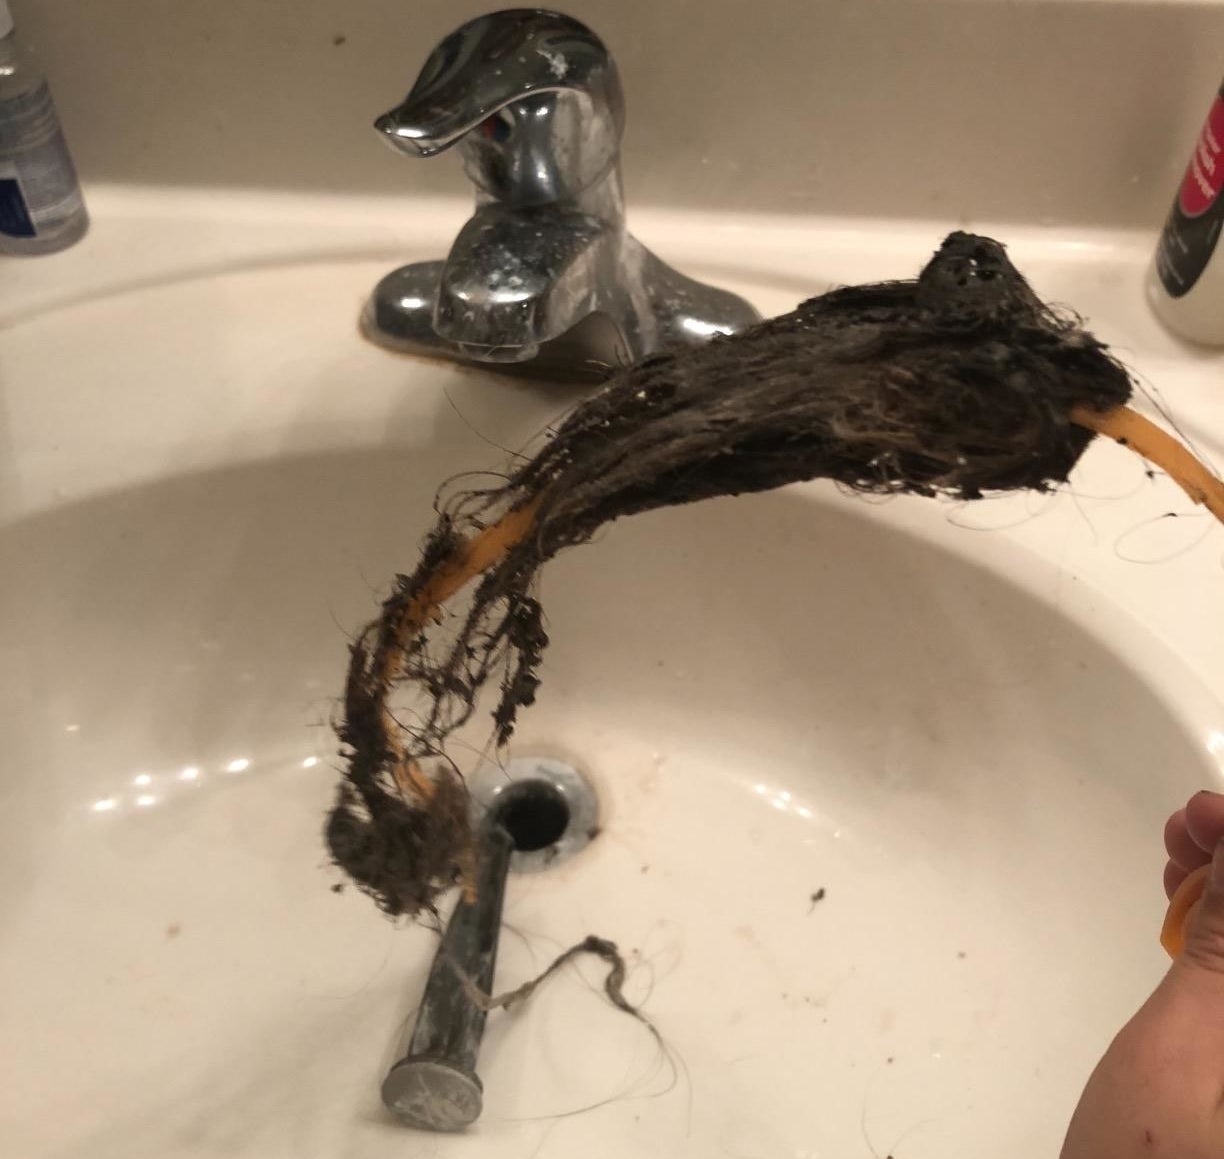 Reviewer photo showing a large clump of hair pulled out from the sink drain